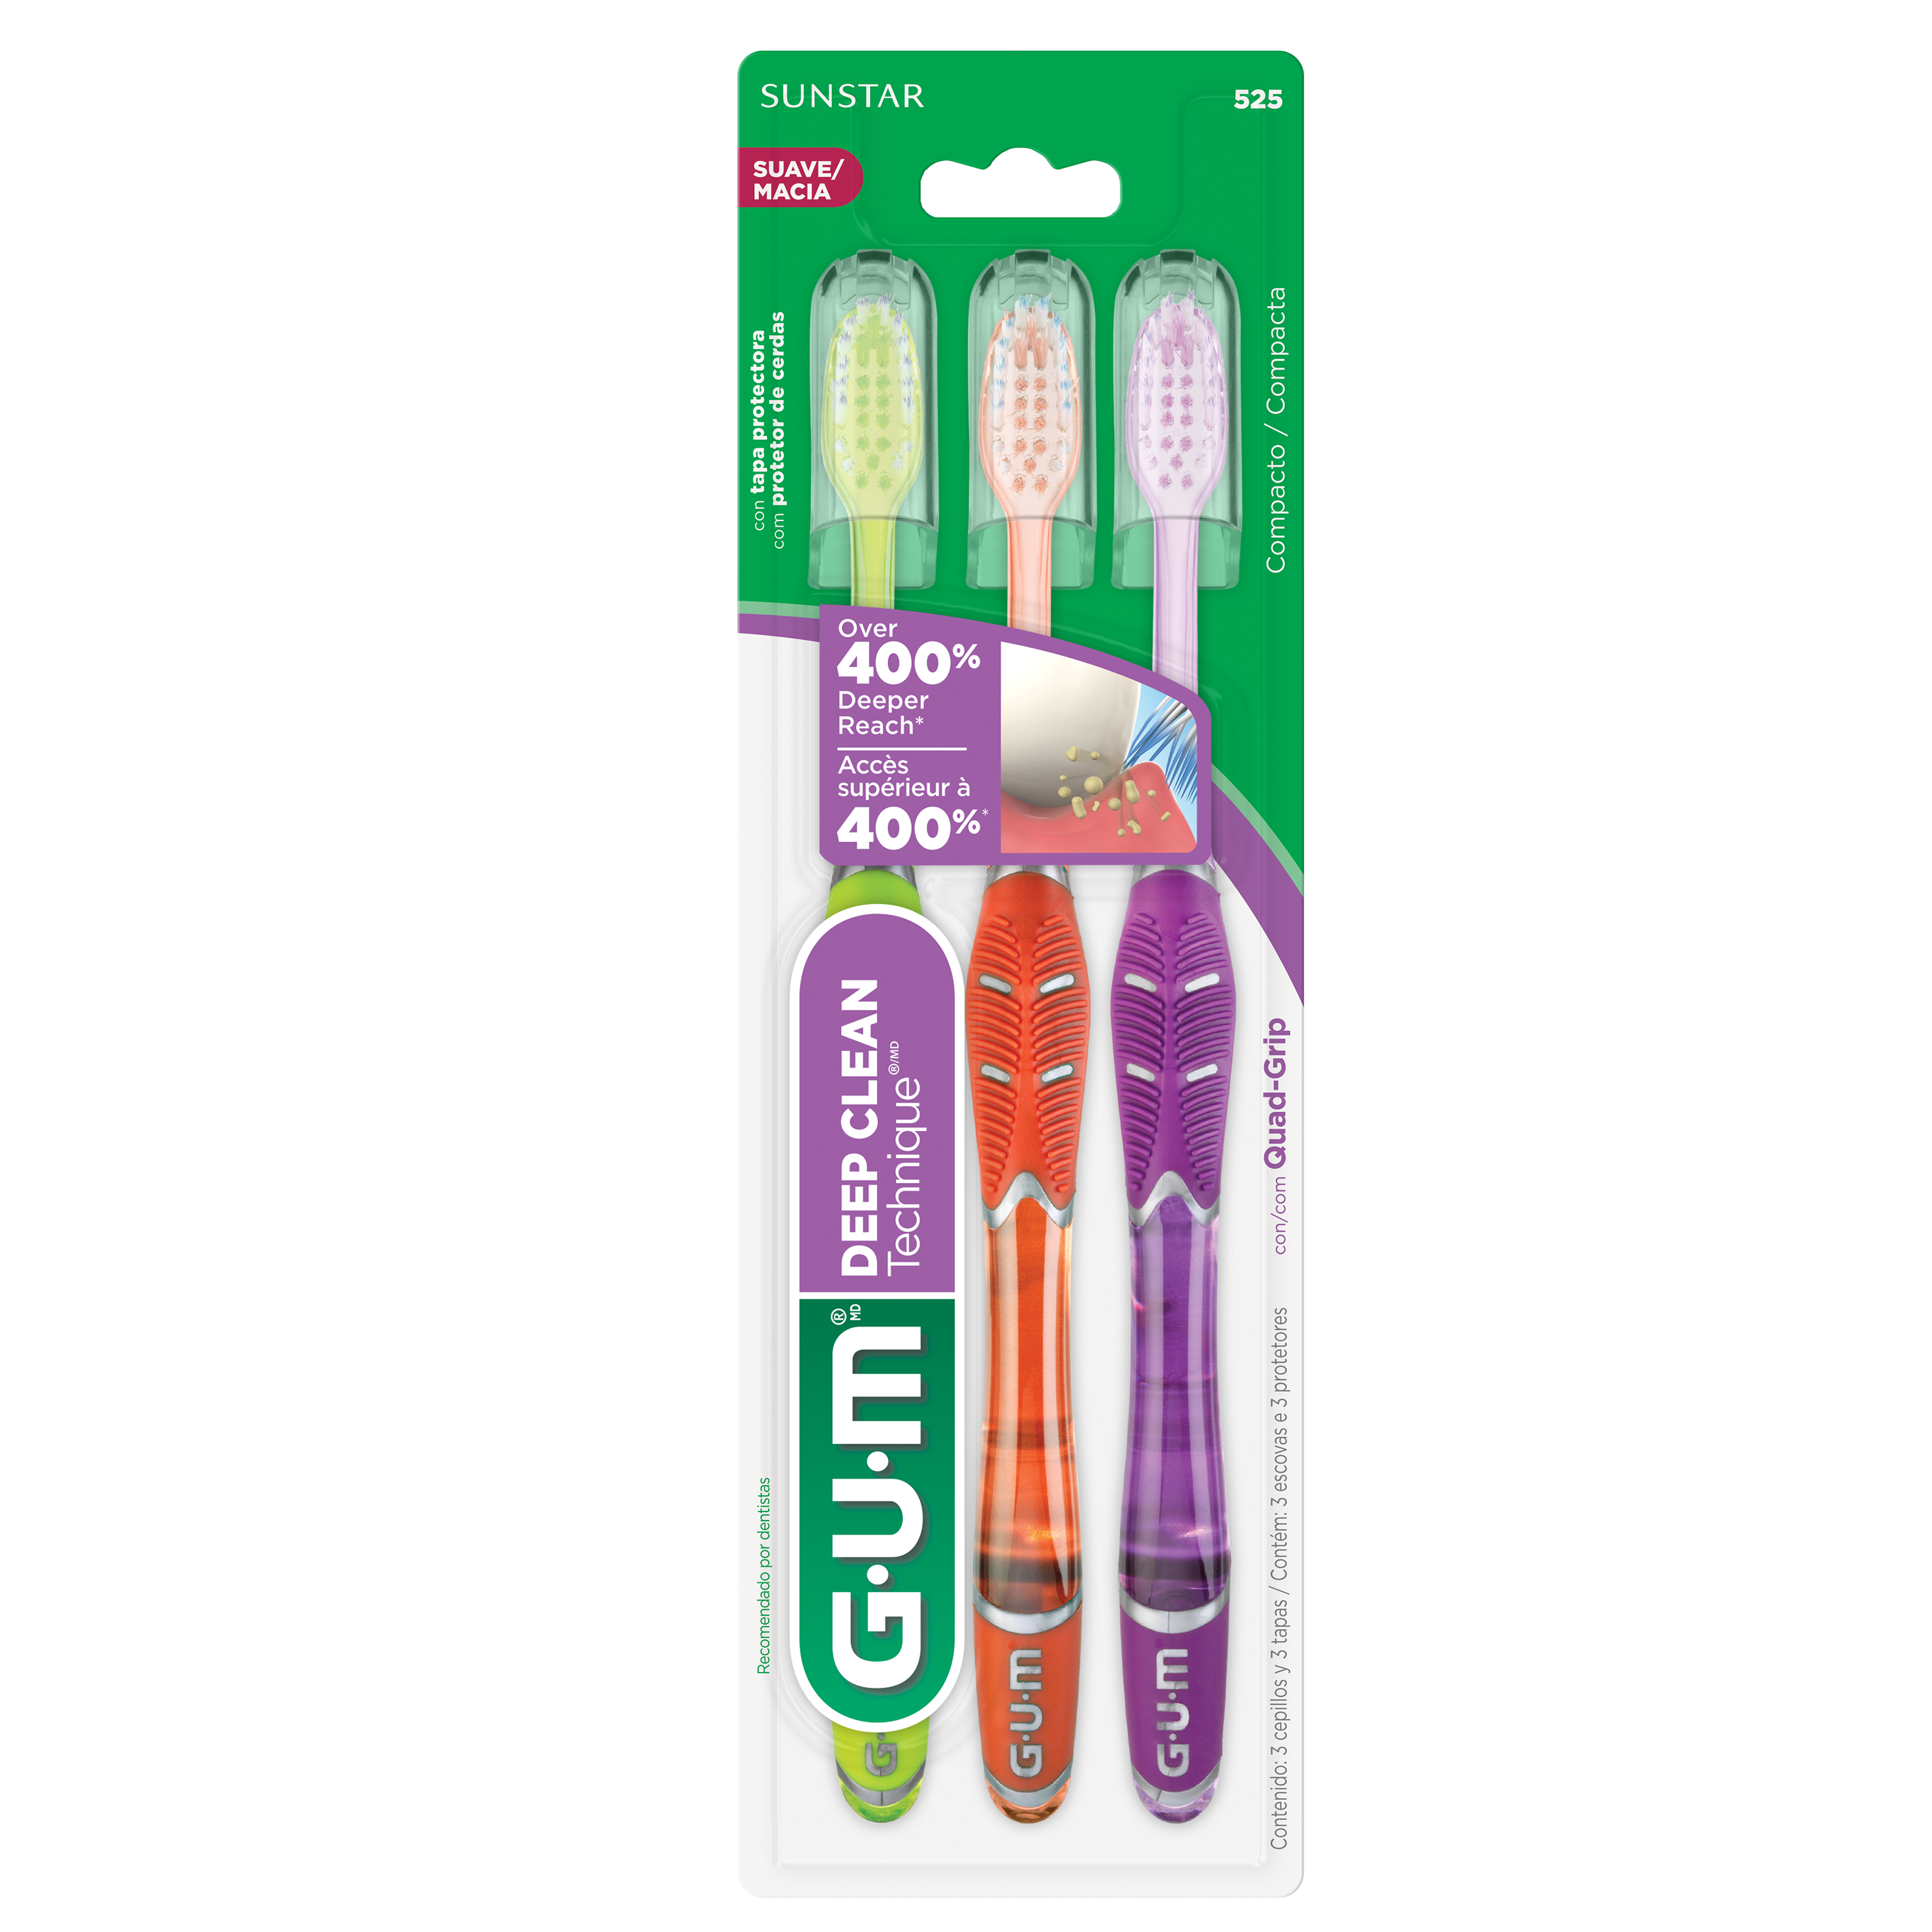 525LT-Product-Packaging-Toothbrush-Technique-DeepClean-Pro-front-3ct.png